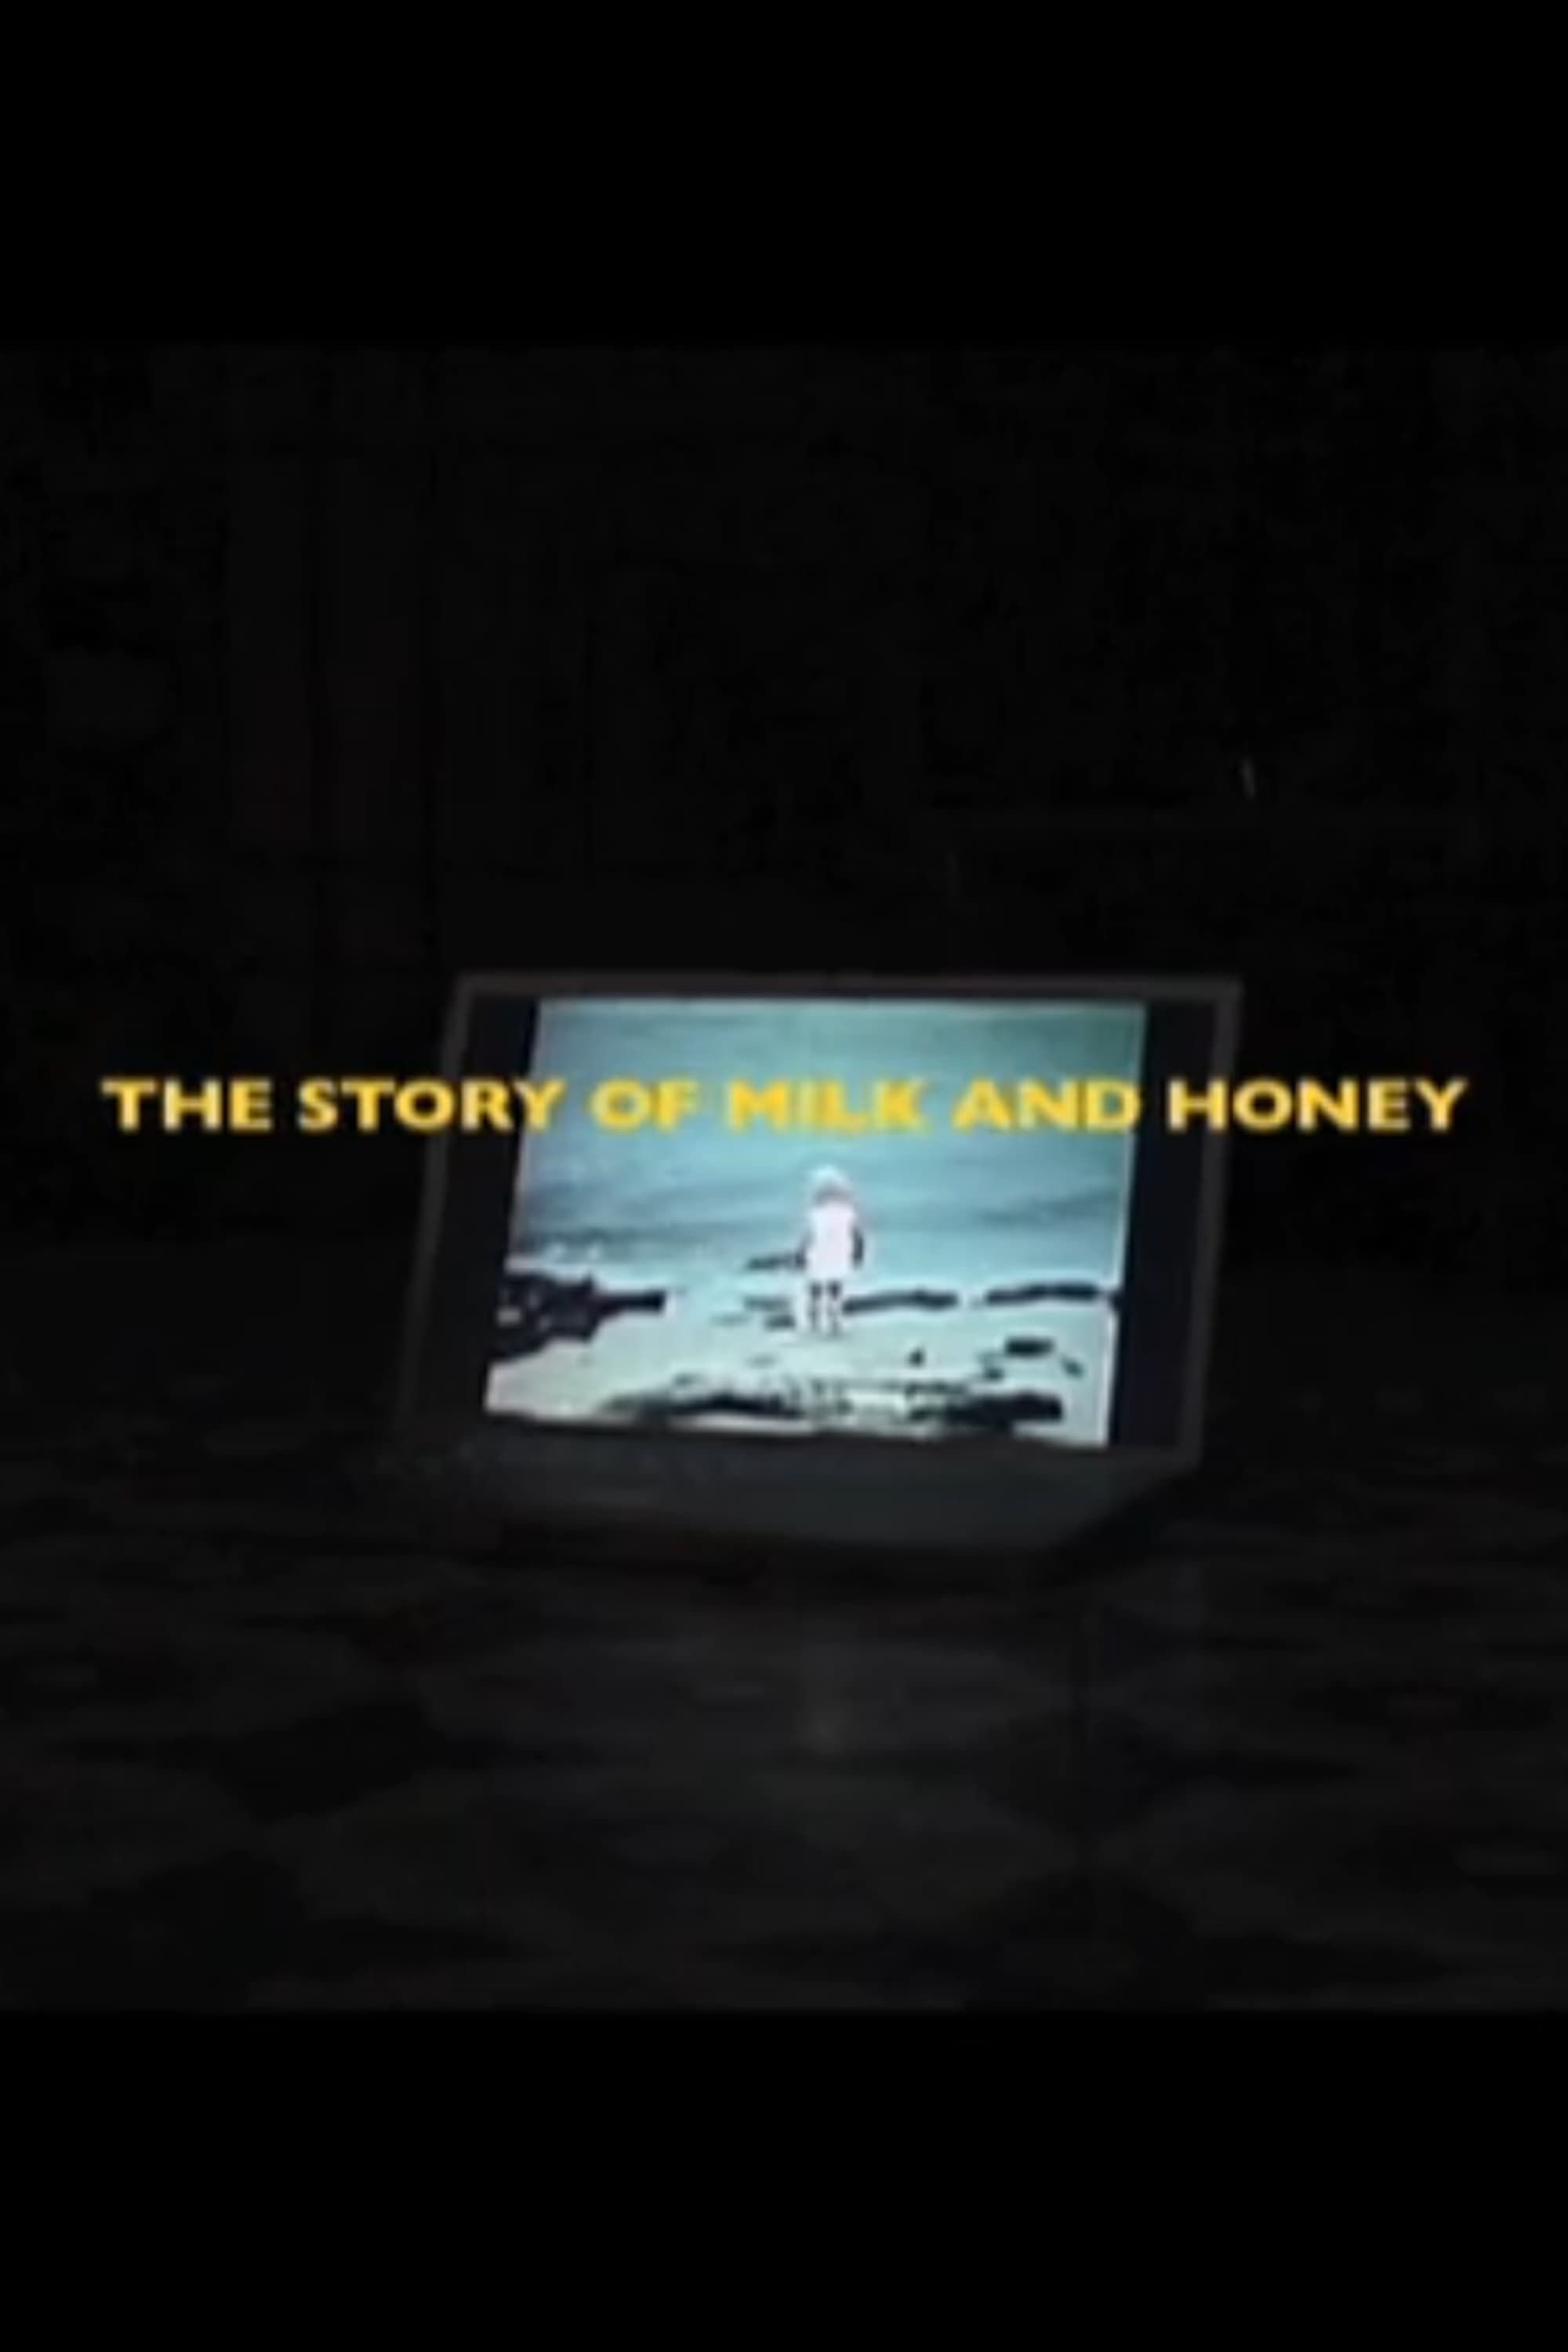 The Story of Milk and Honey